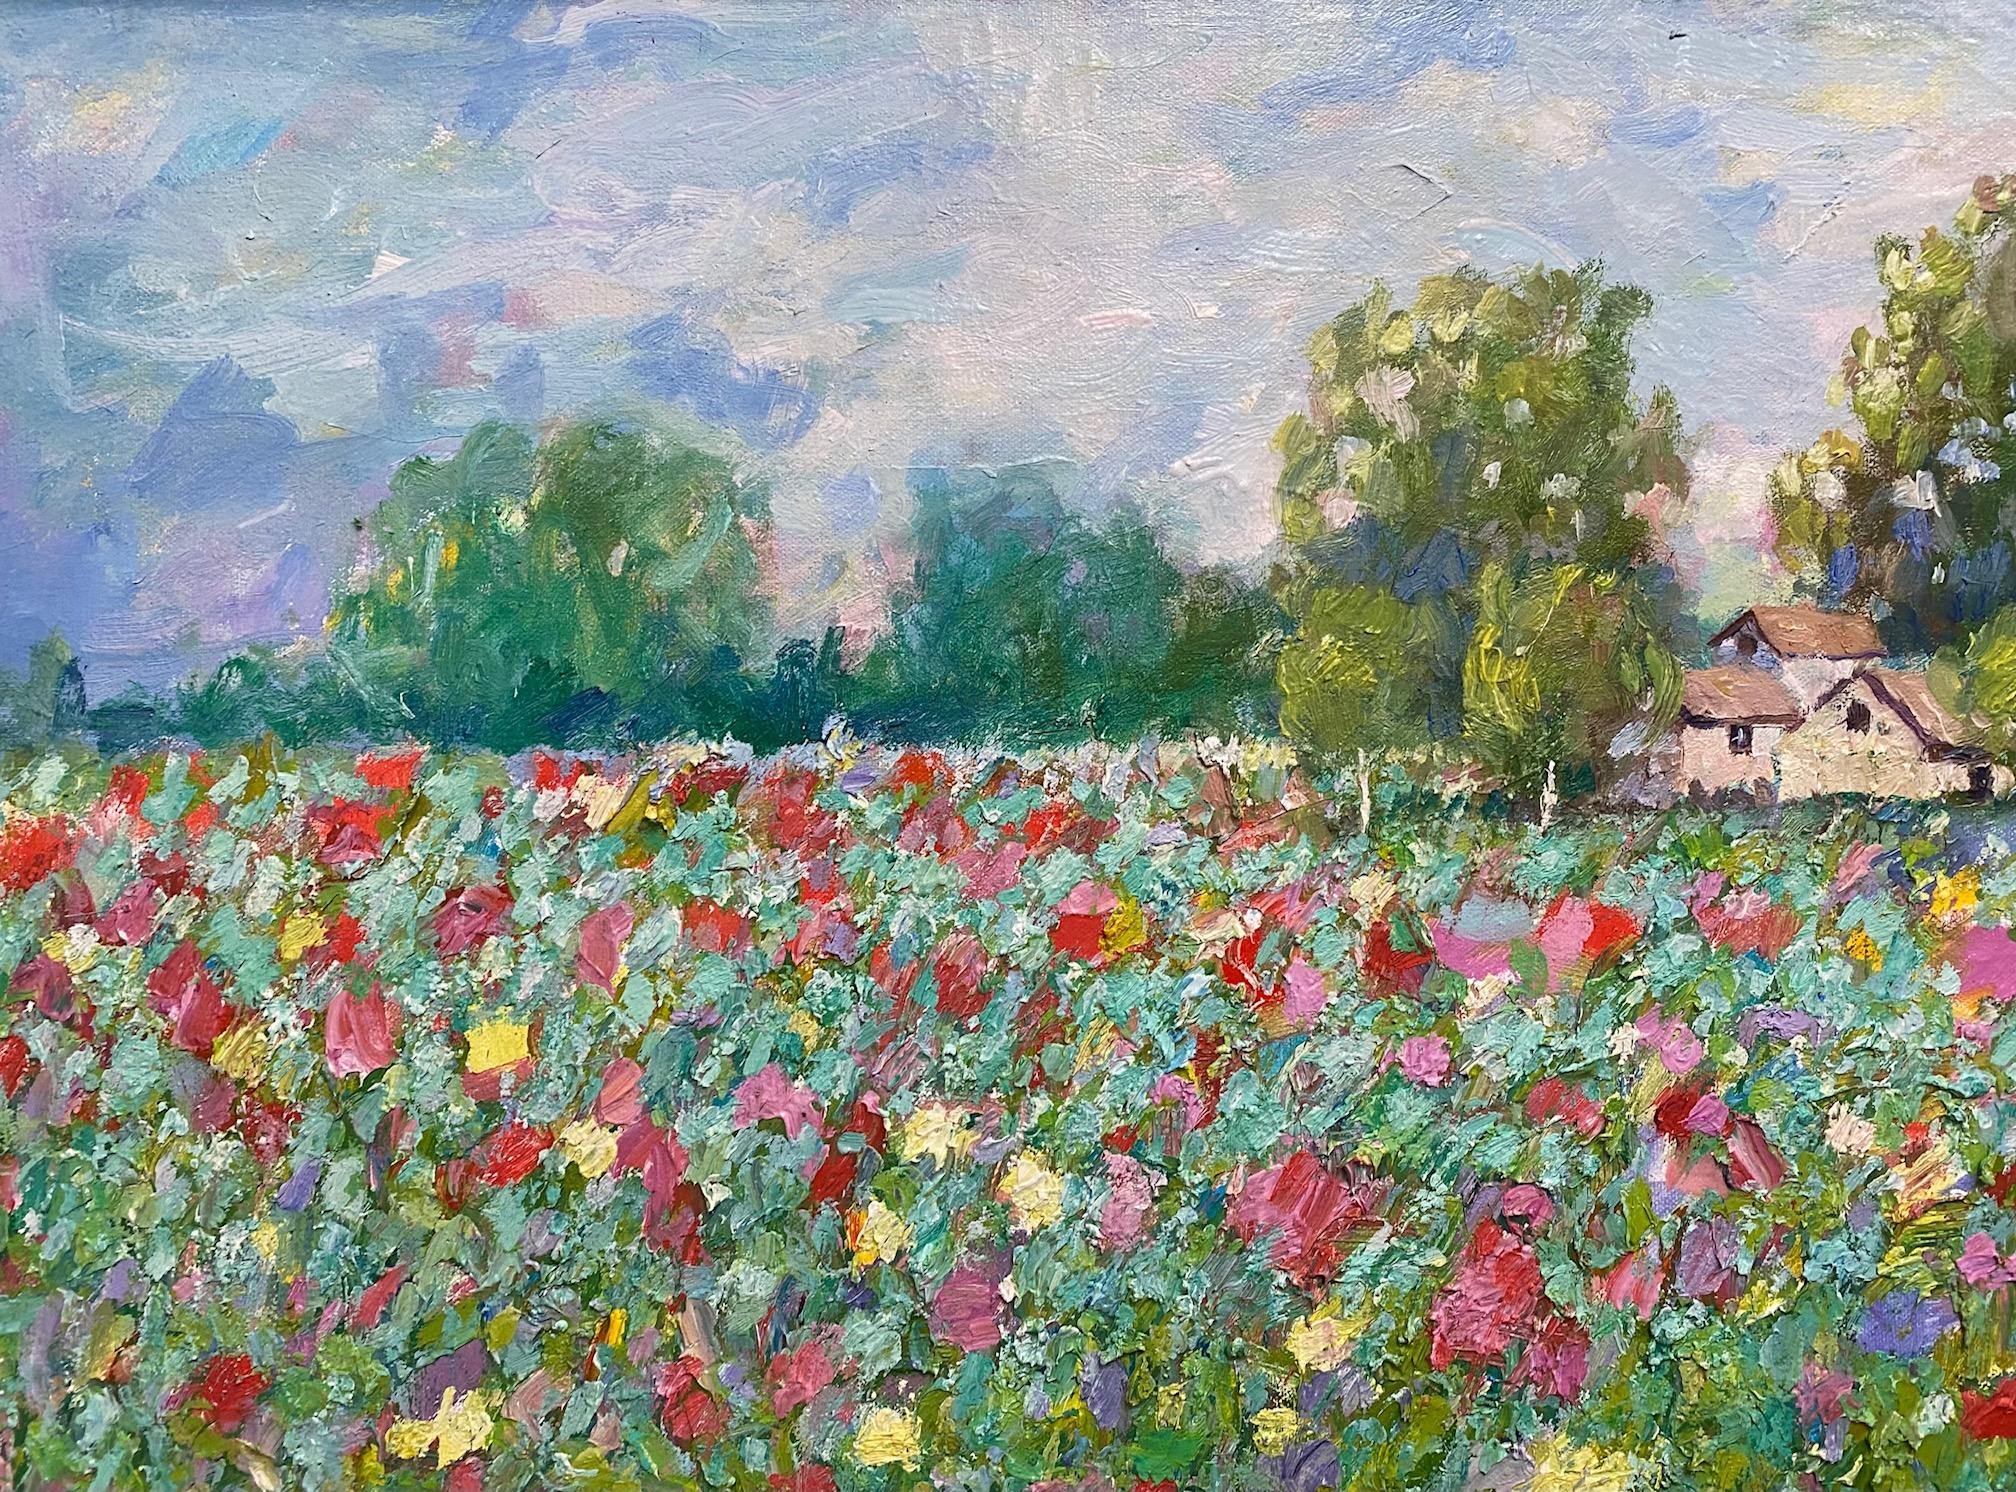 Homestead of Flowers, original 30x40 contemporary French impressionist landscape - Gray Landscape Painting by Eugene Maziarz